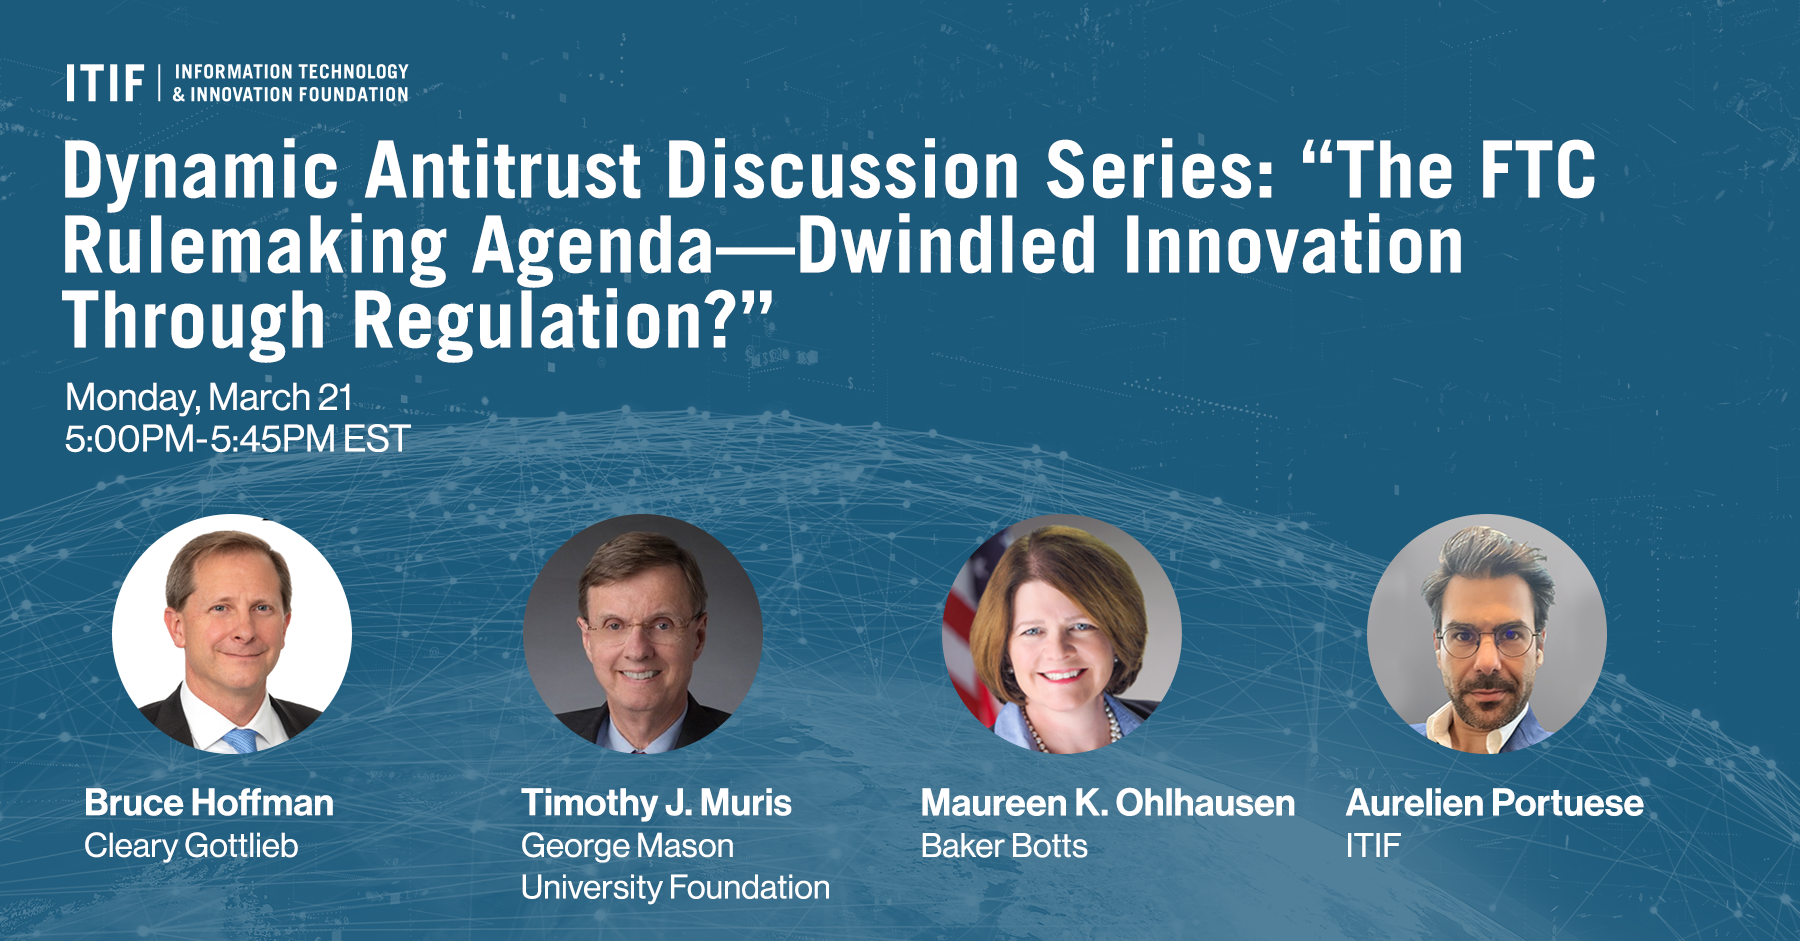 Dynamic Antitrust Discussion Series: “The FTC Rulemaking Agenda—Dwindled Innovation Through Regulation?”